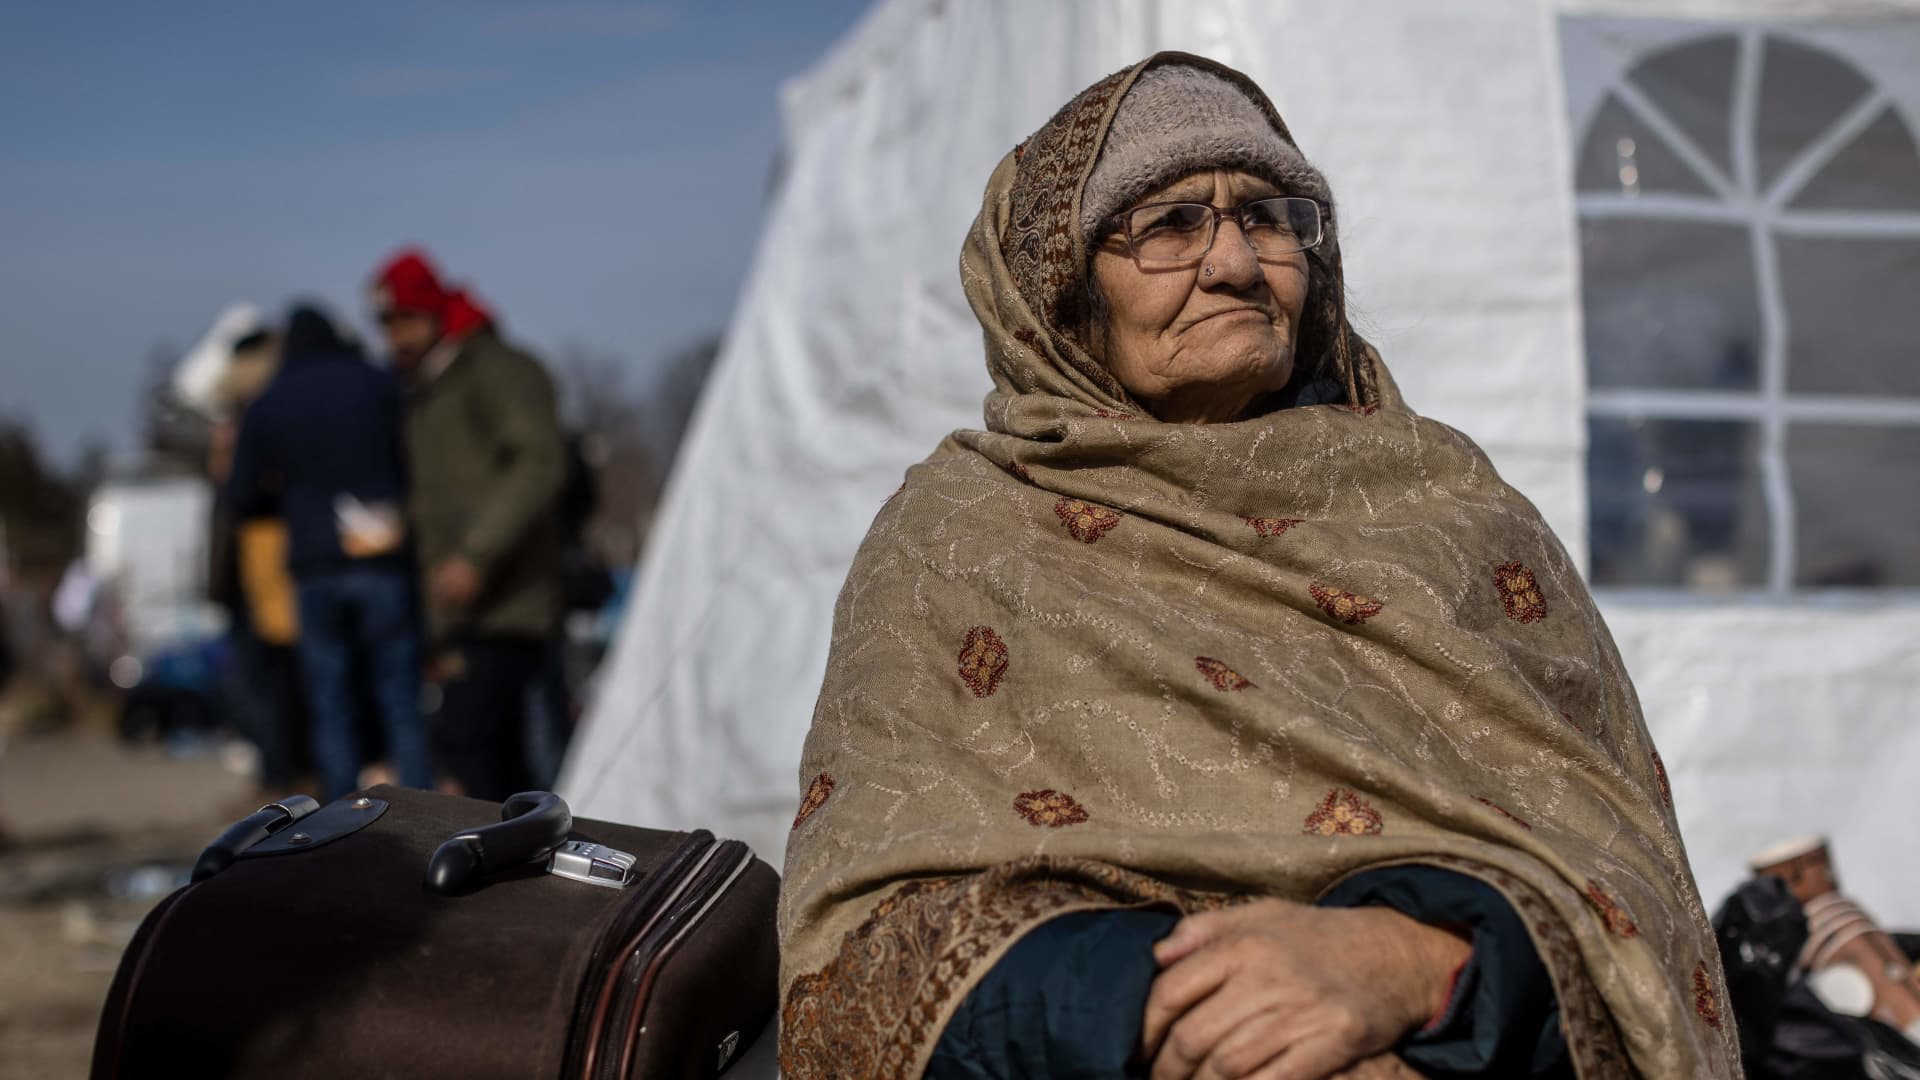 An elderly woman from Pakistan sits at the border crossing in Medyka, eastern Poland as refugees continue to arrive from Ukraine on March 1, 2022.